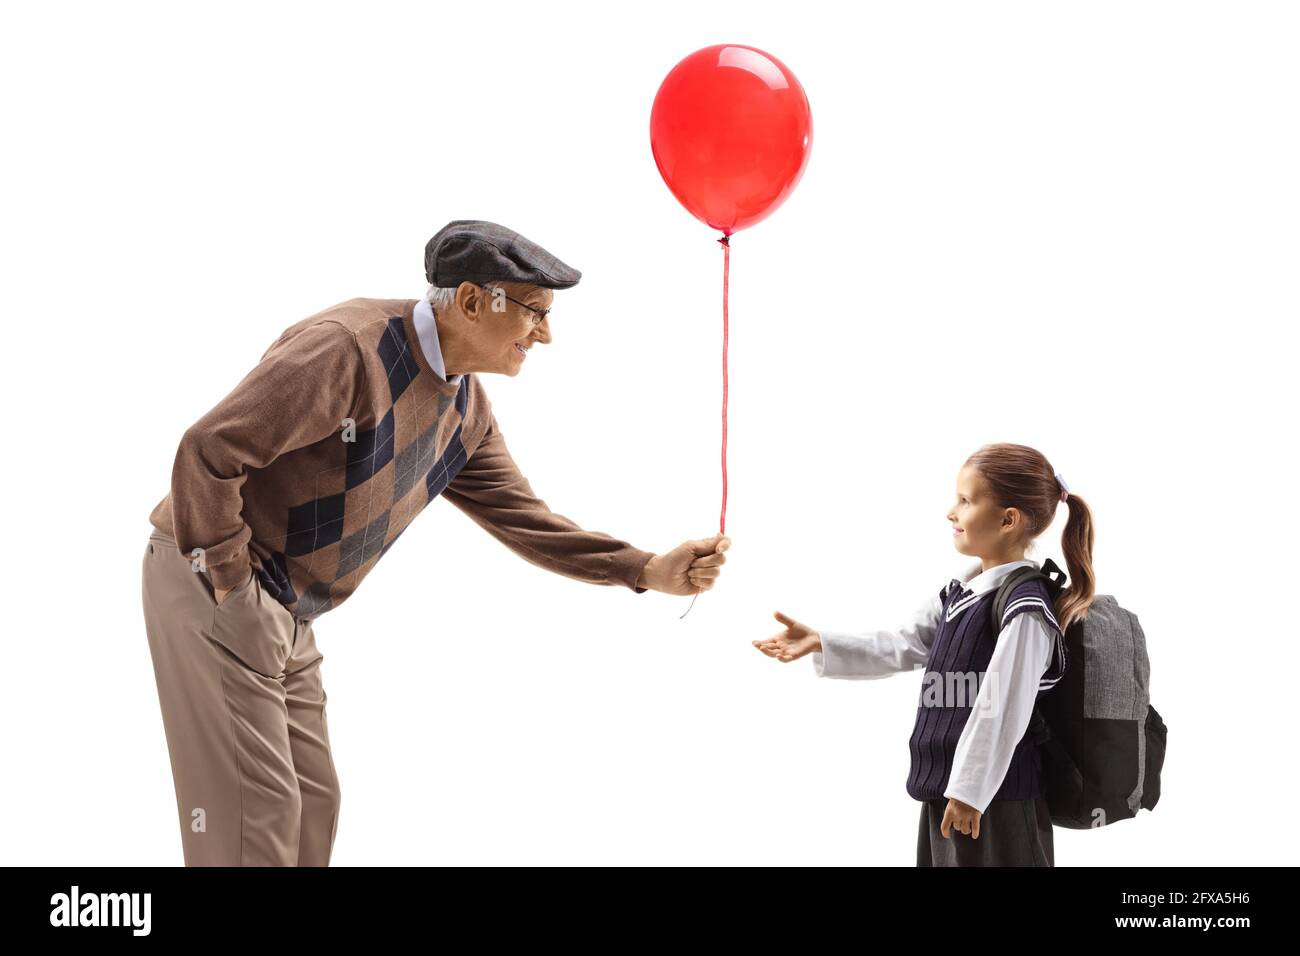 Grandfather giving a red balloon to a schoolgirl isolated on white background Stock Photo